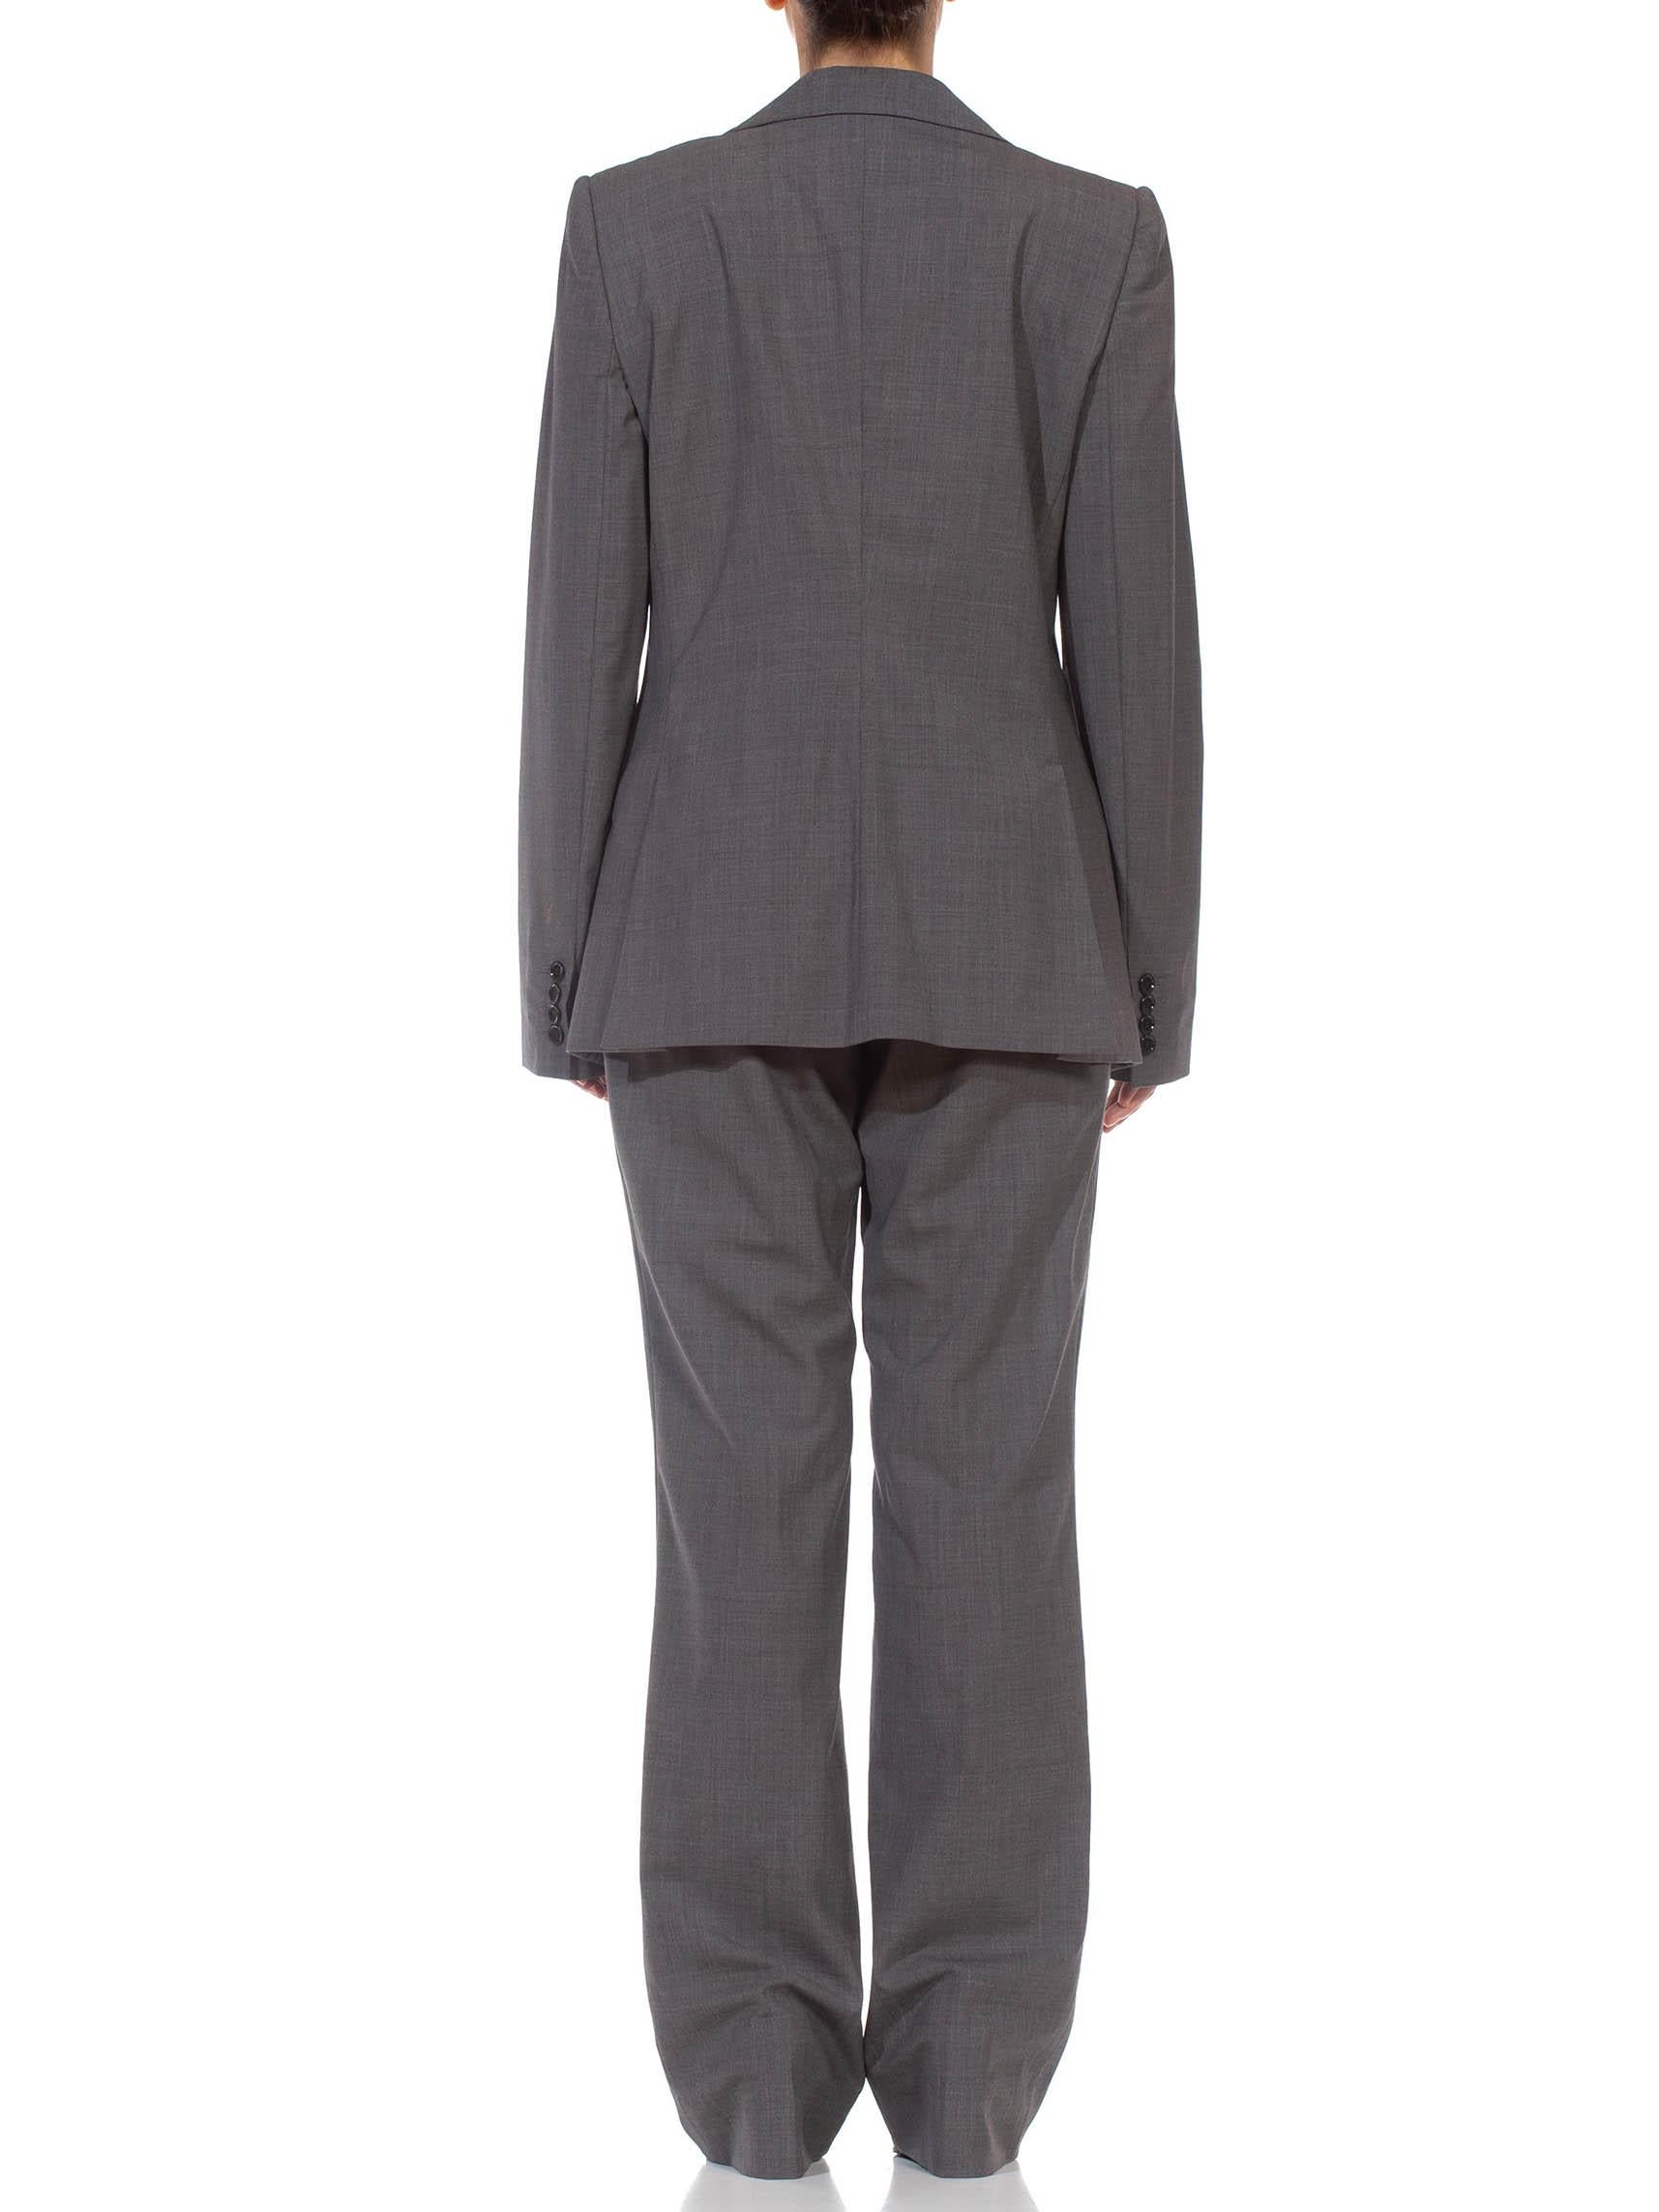 1990S DOLCE & GABBANA Grey Wool Blend Single Breasted Pant Suit In Excellent Condition For Sale In New York, NY